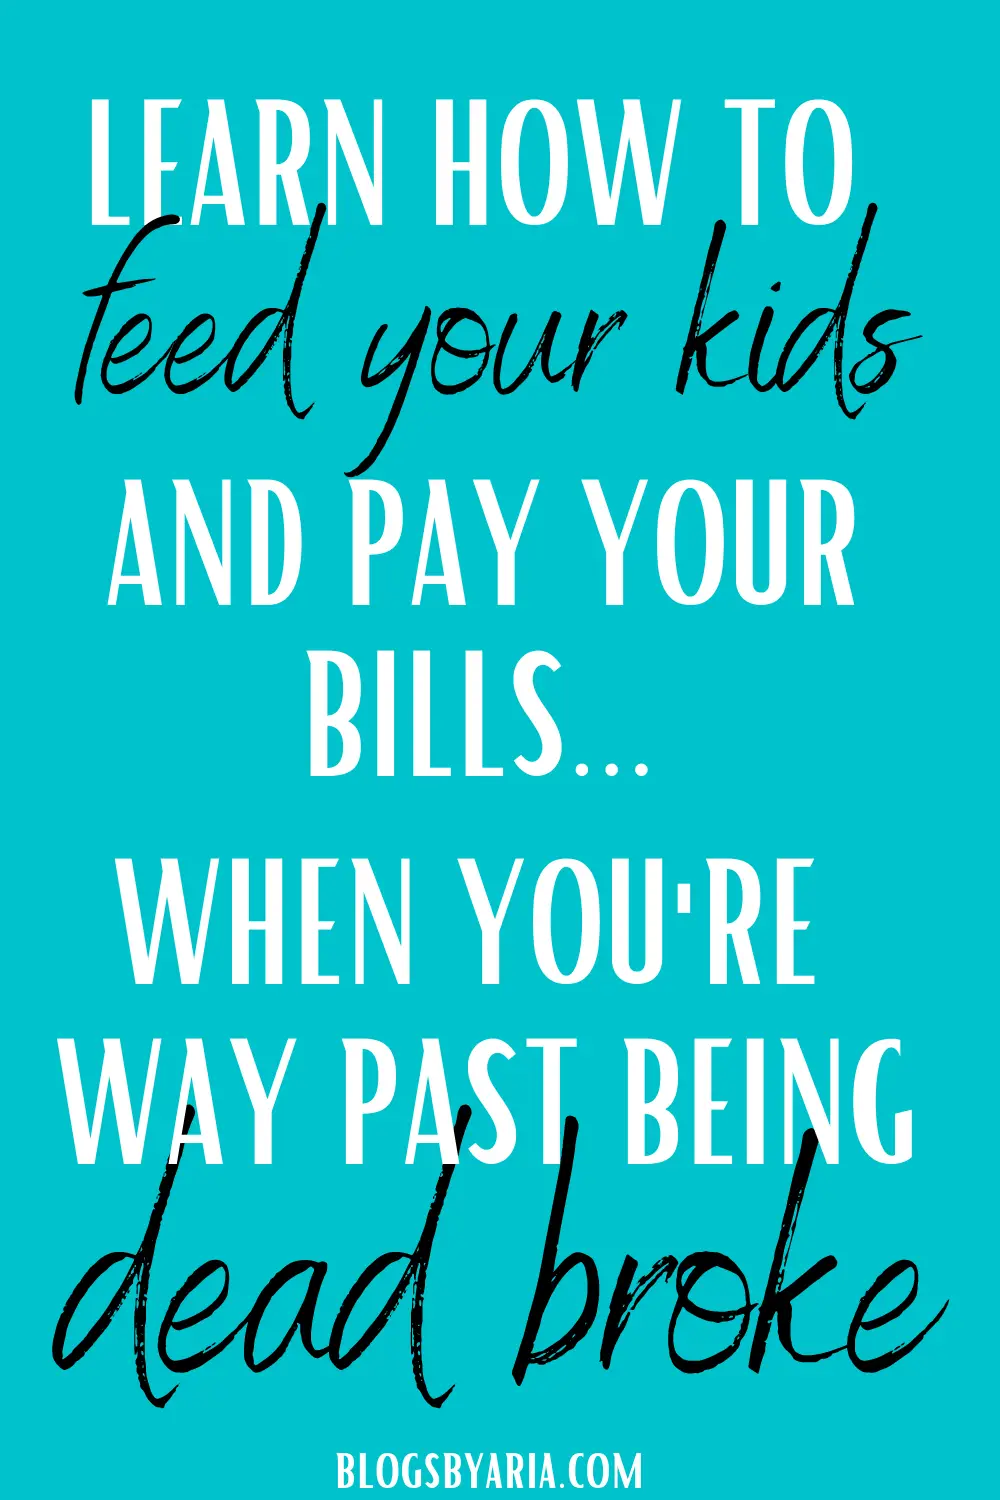 how to feed your kids and pay your bills when you're dead broke